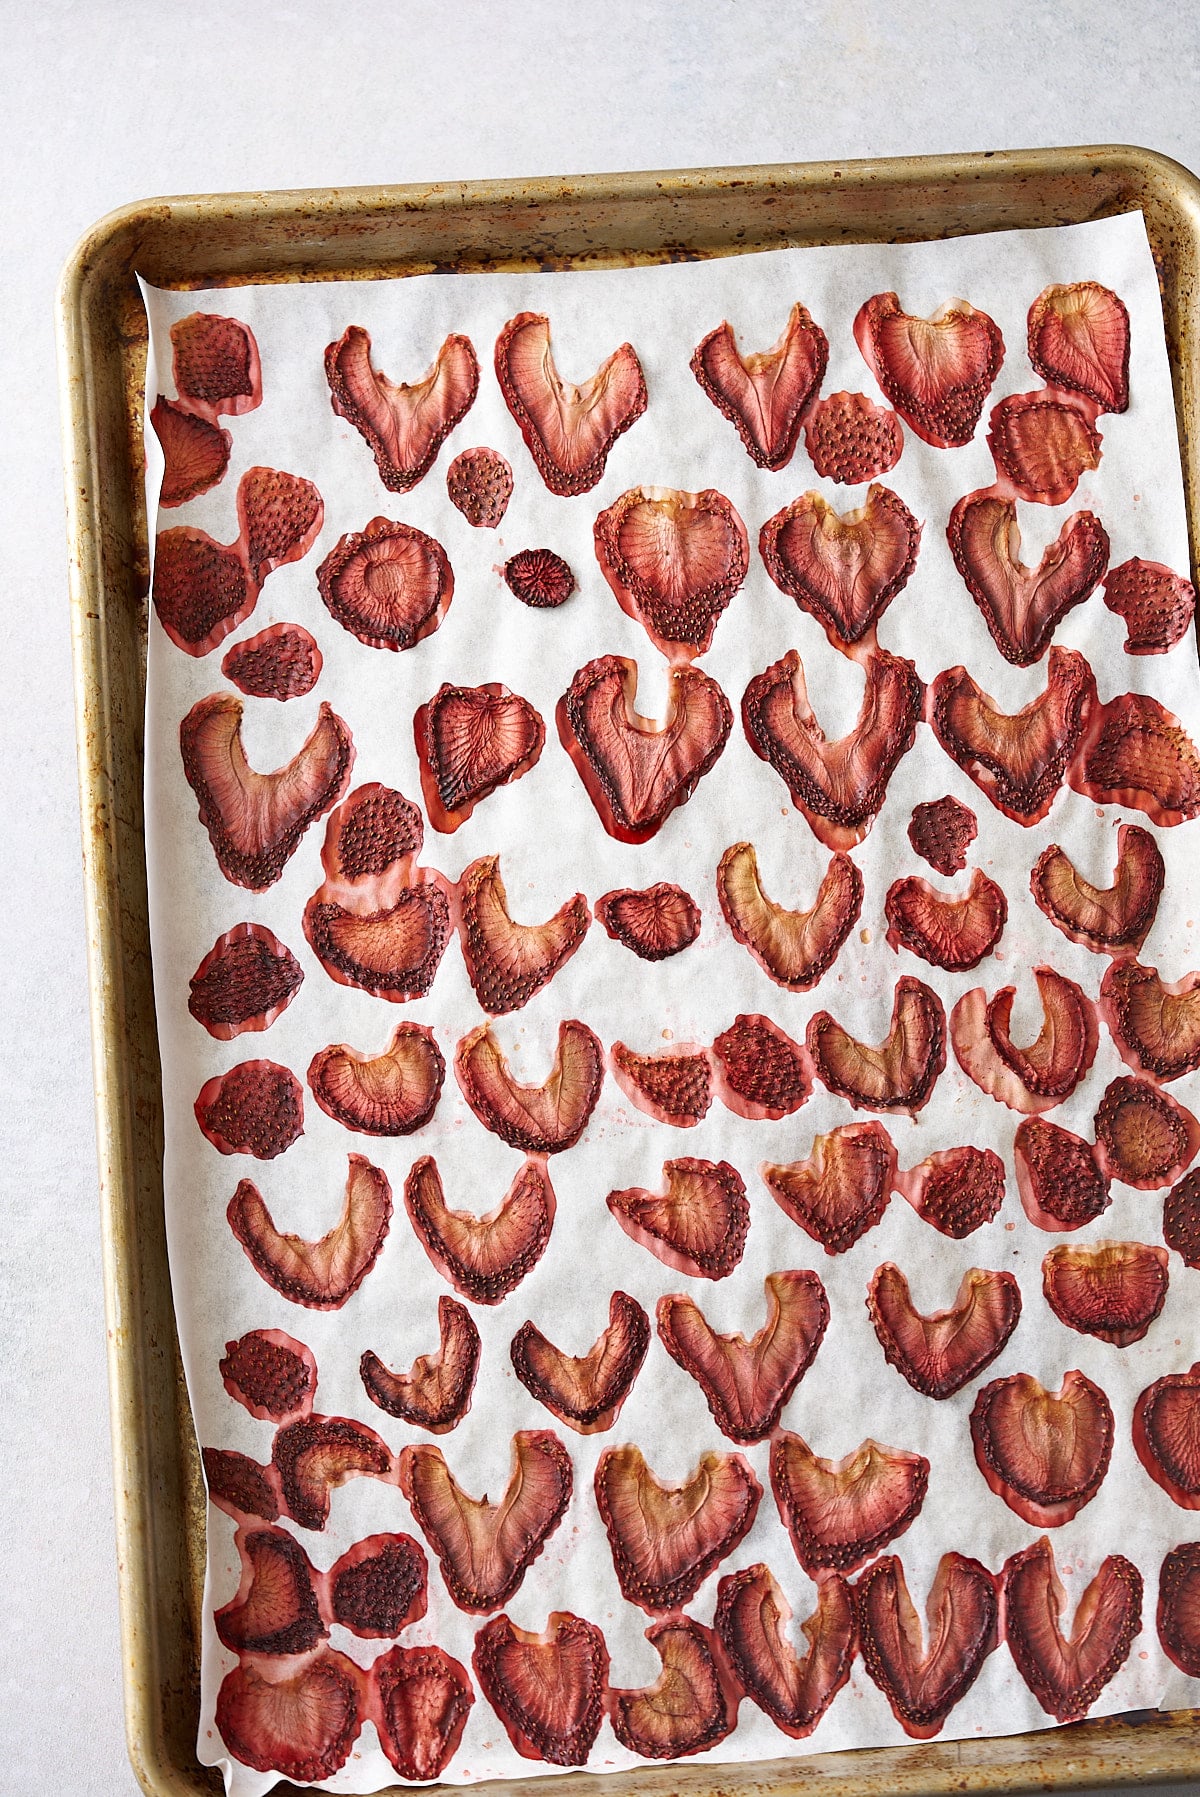 dehydrated strawberries on parchment paper after dehydrating in oven